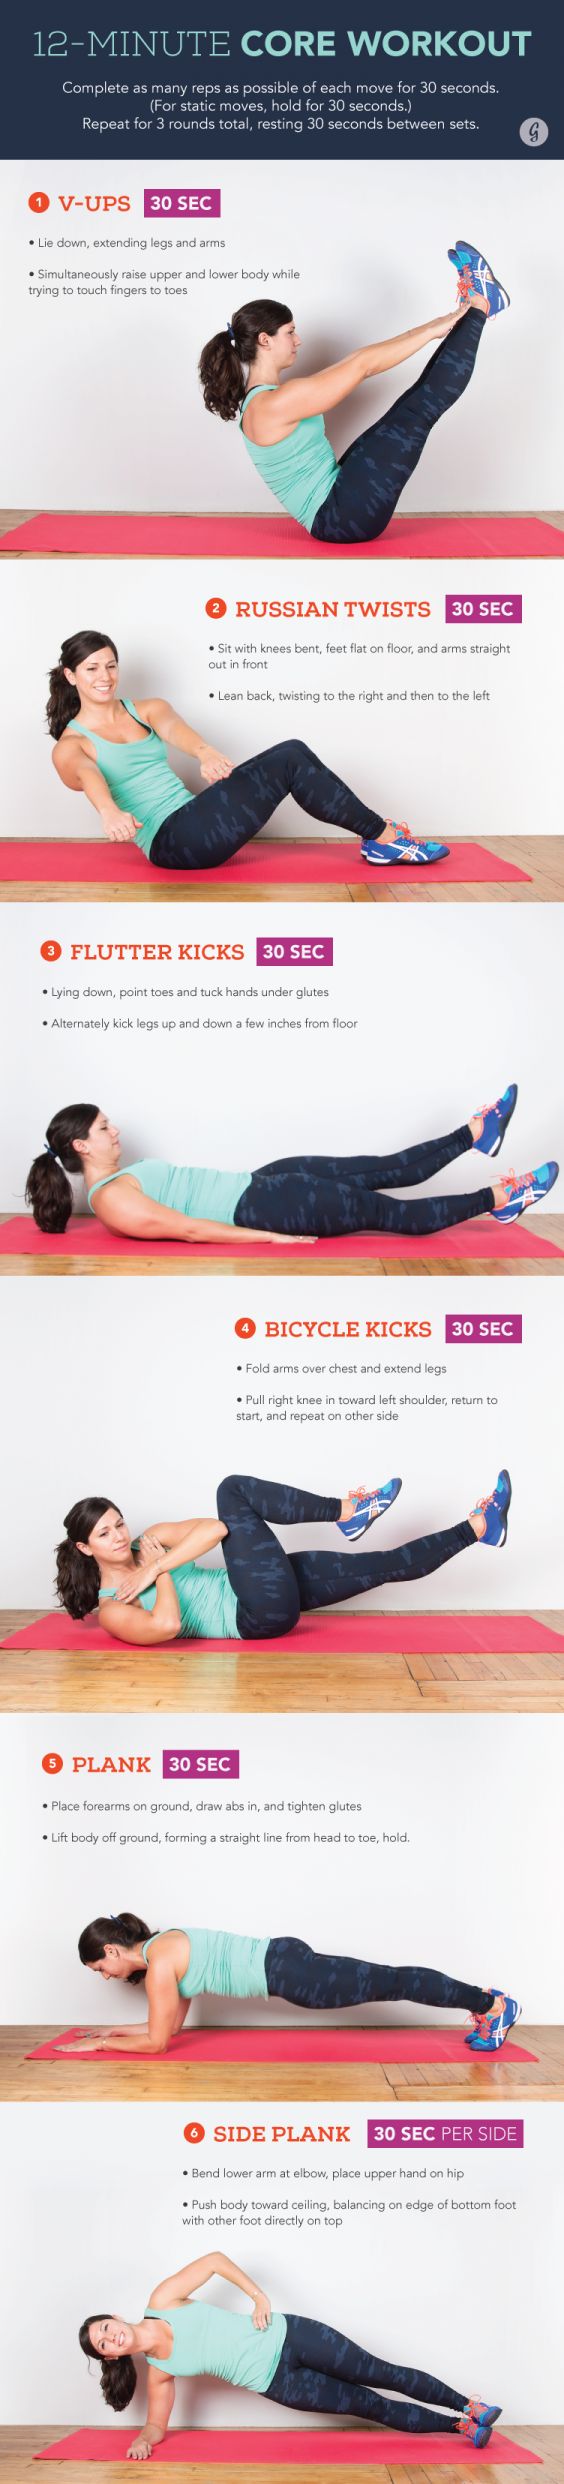 How to Do a Sit Up Correctly, Abs and Core Exercises